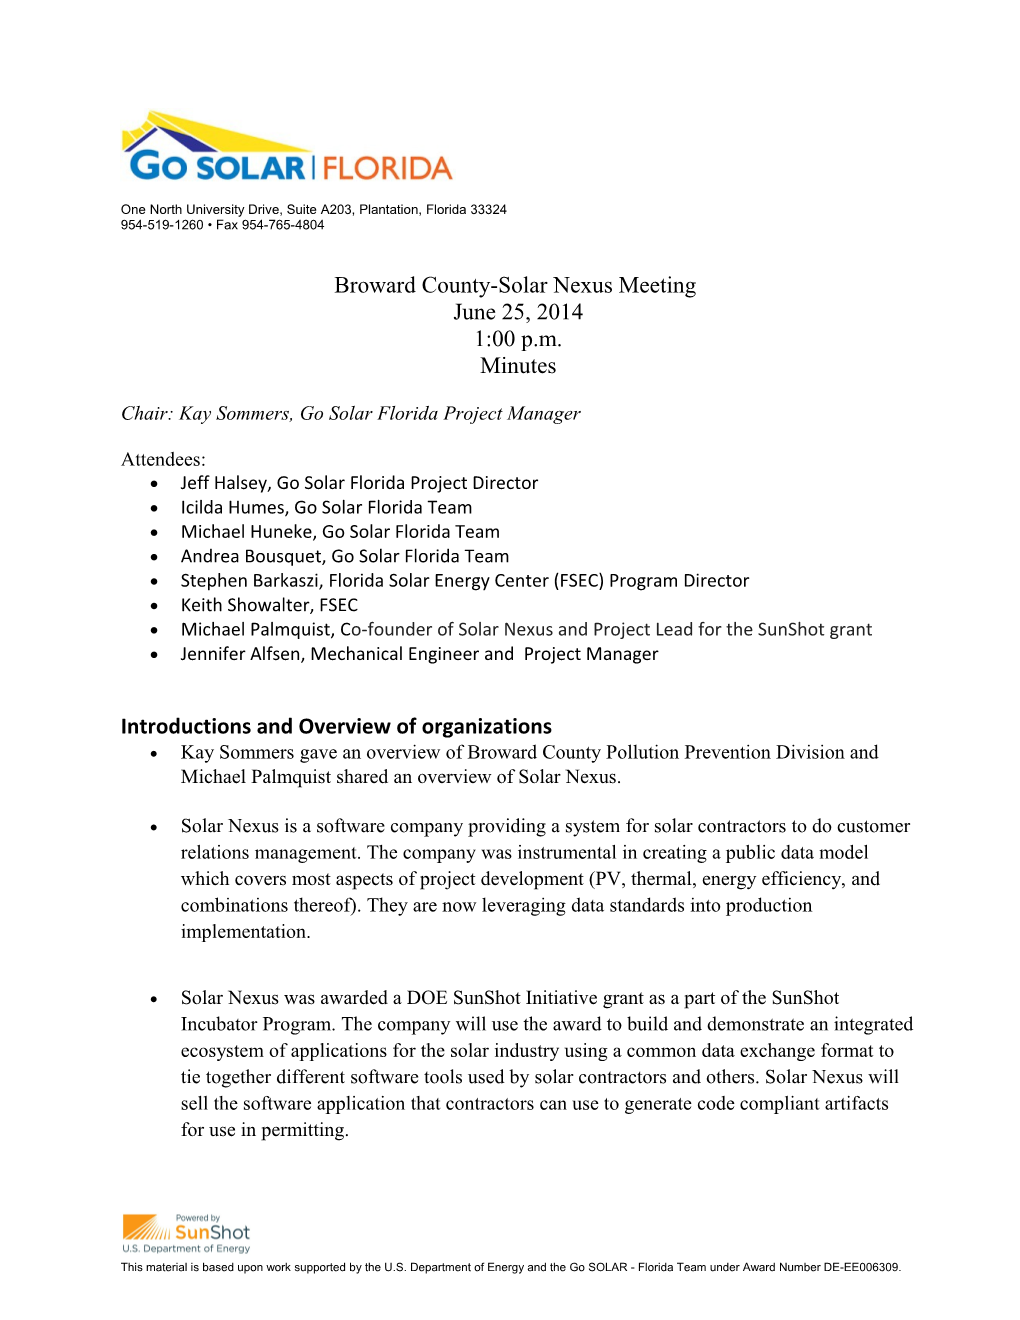 Chair: Kay Sommers, Go Solar Florida Project Manager